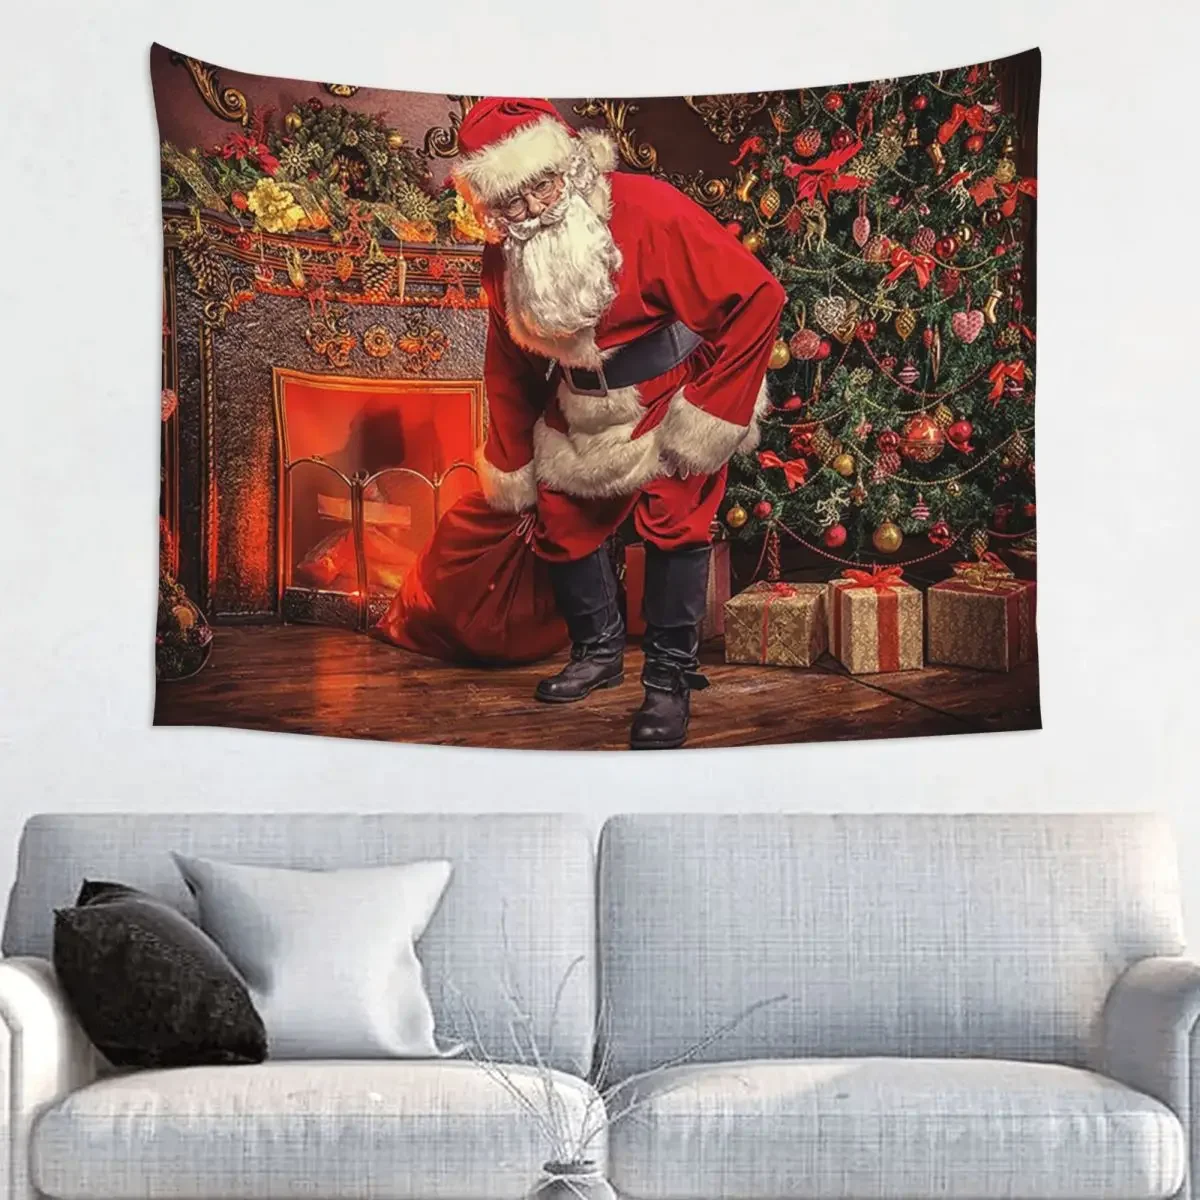 

Merry Christmas Gift Santa Claus Tapestry Bohemian Wall Hanging Avezano New Year Wall Decor Table Cover Witchcraft Wall Tapestry